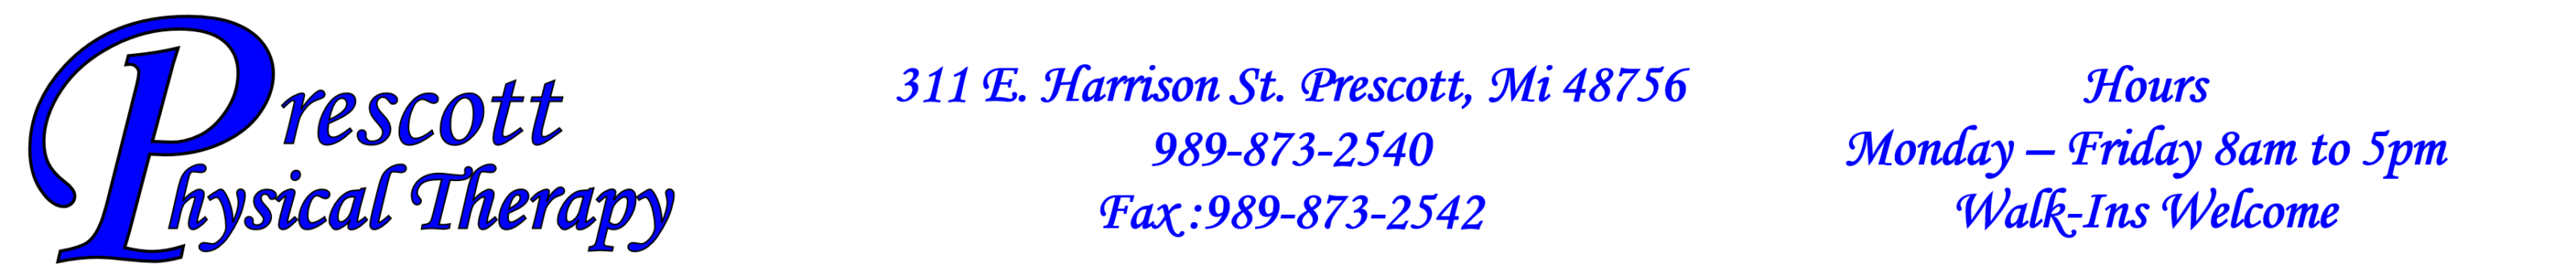 Prescott Physical Therapy